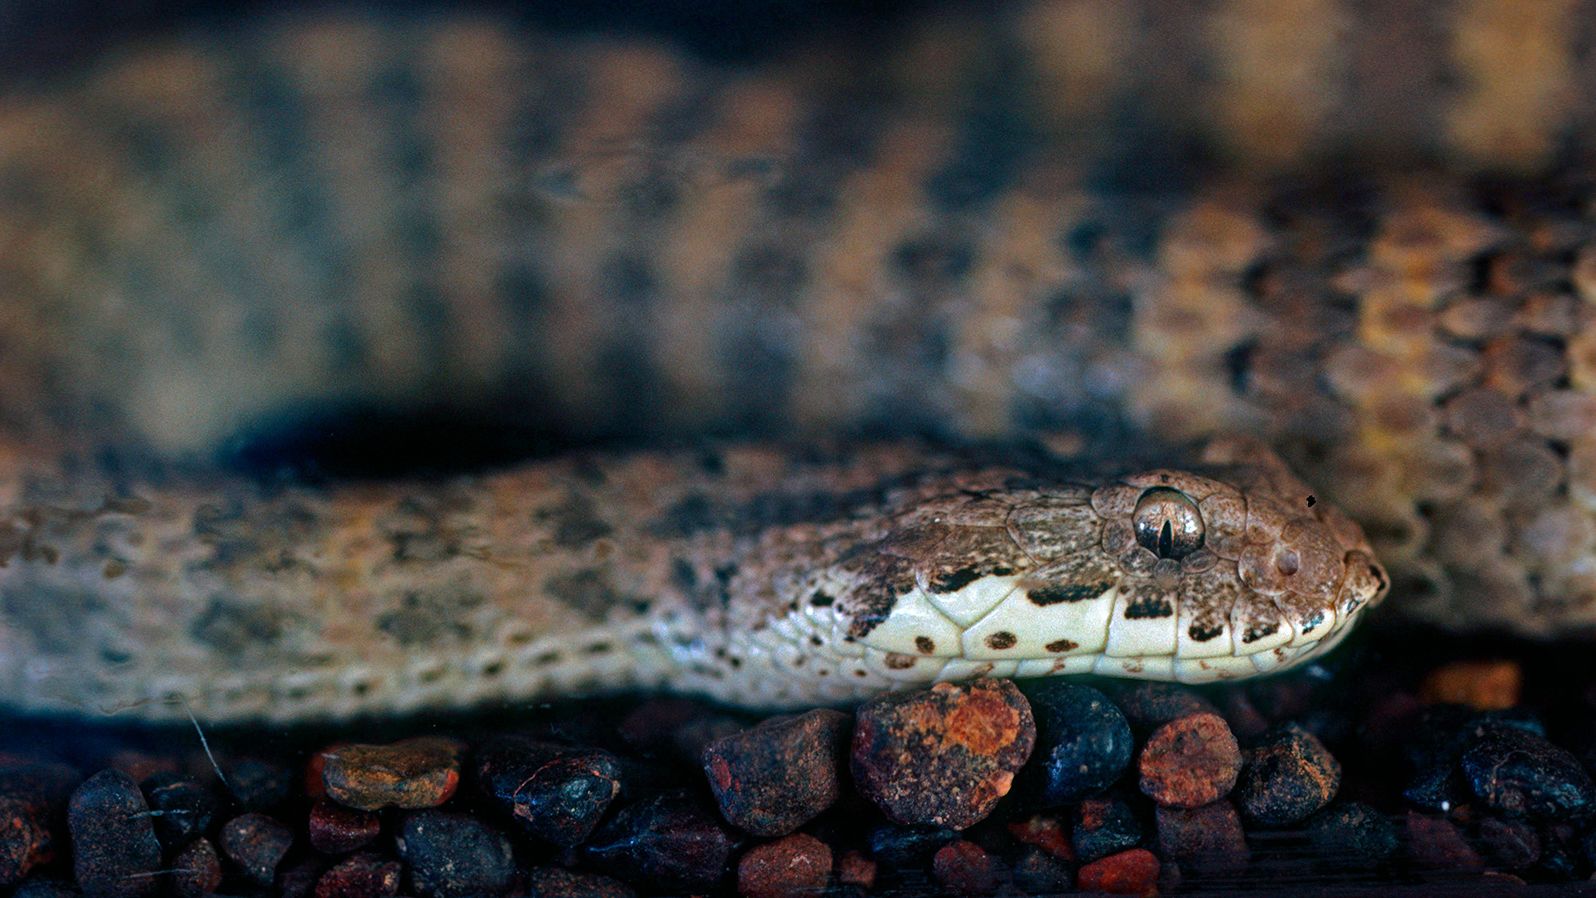 The common death adder (Acanthophis antarcticus), a venomous australian snake, was a focus species of the research.